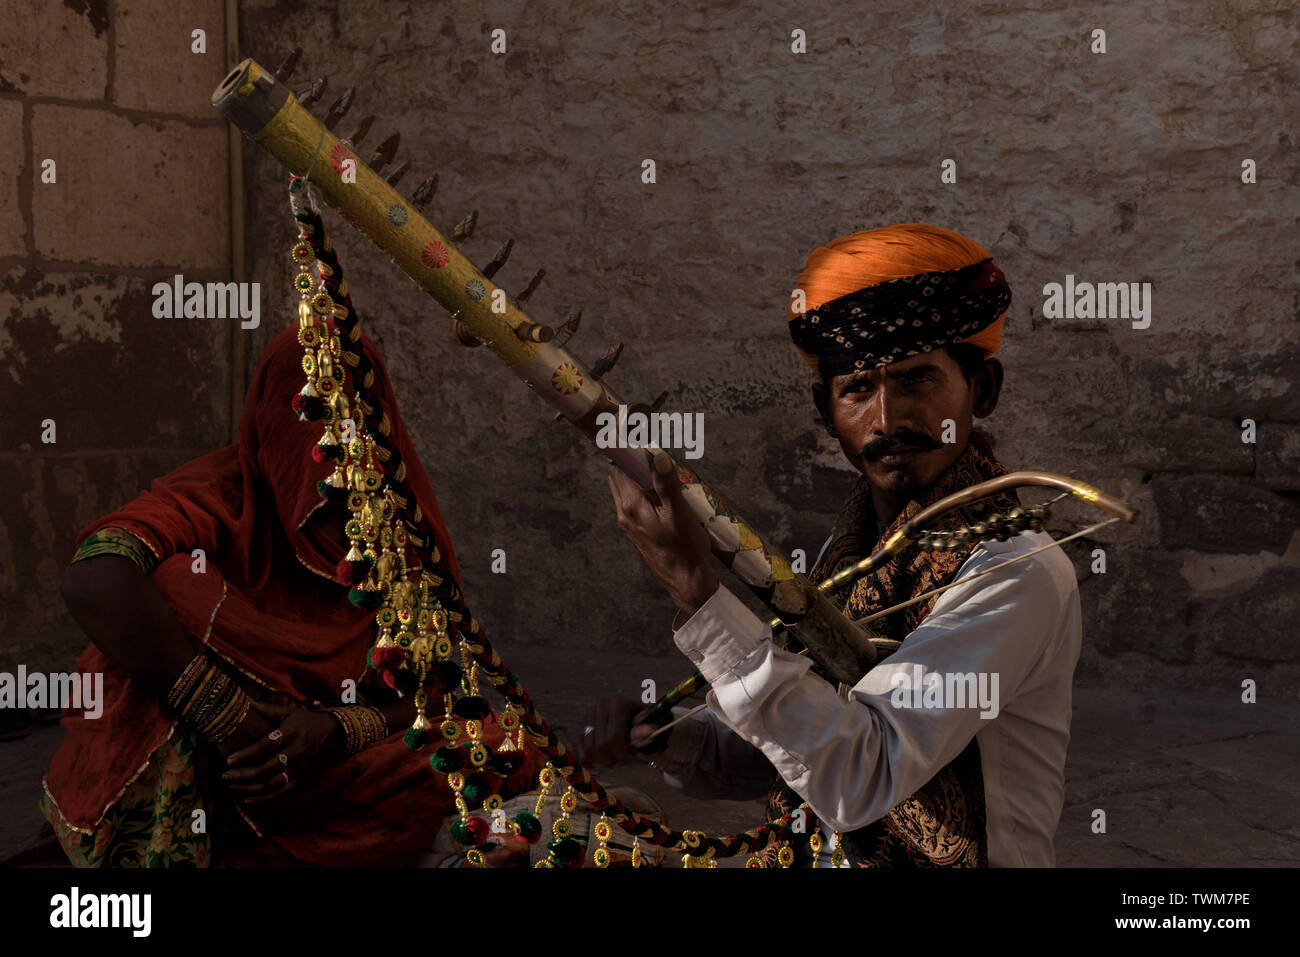 A Rajasthani Violinist playing folk music outside Mehrangarh Fort,Jodhpur,India while his wife was sitting under a veil. Stock Photo